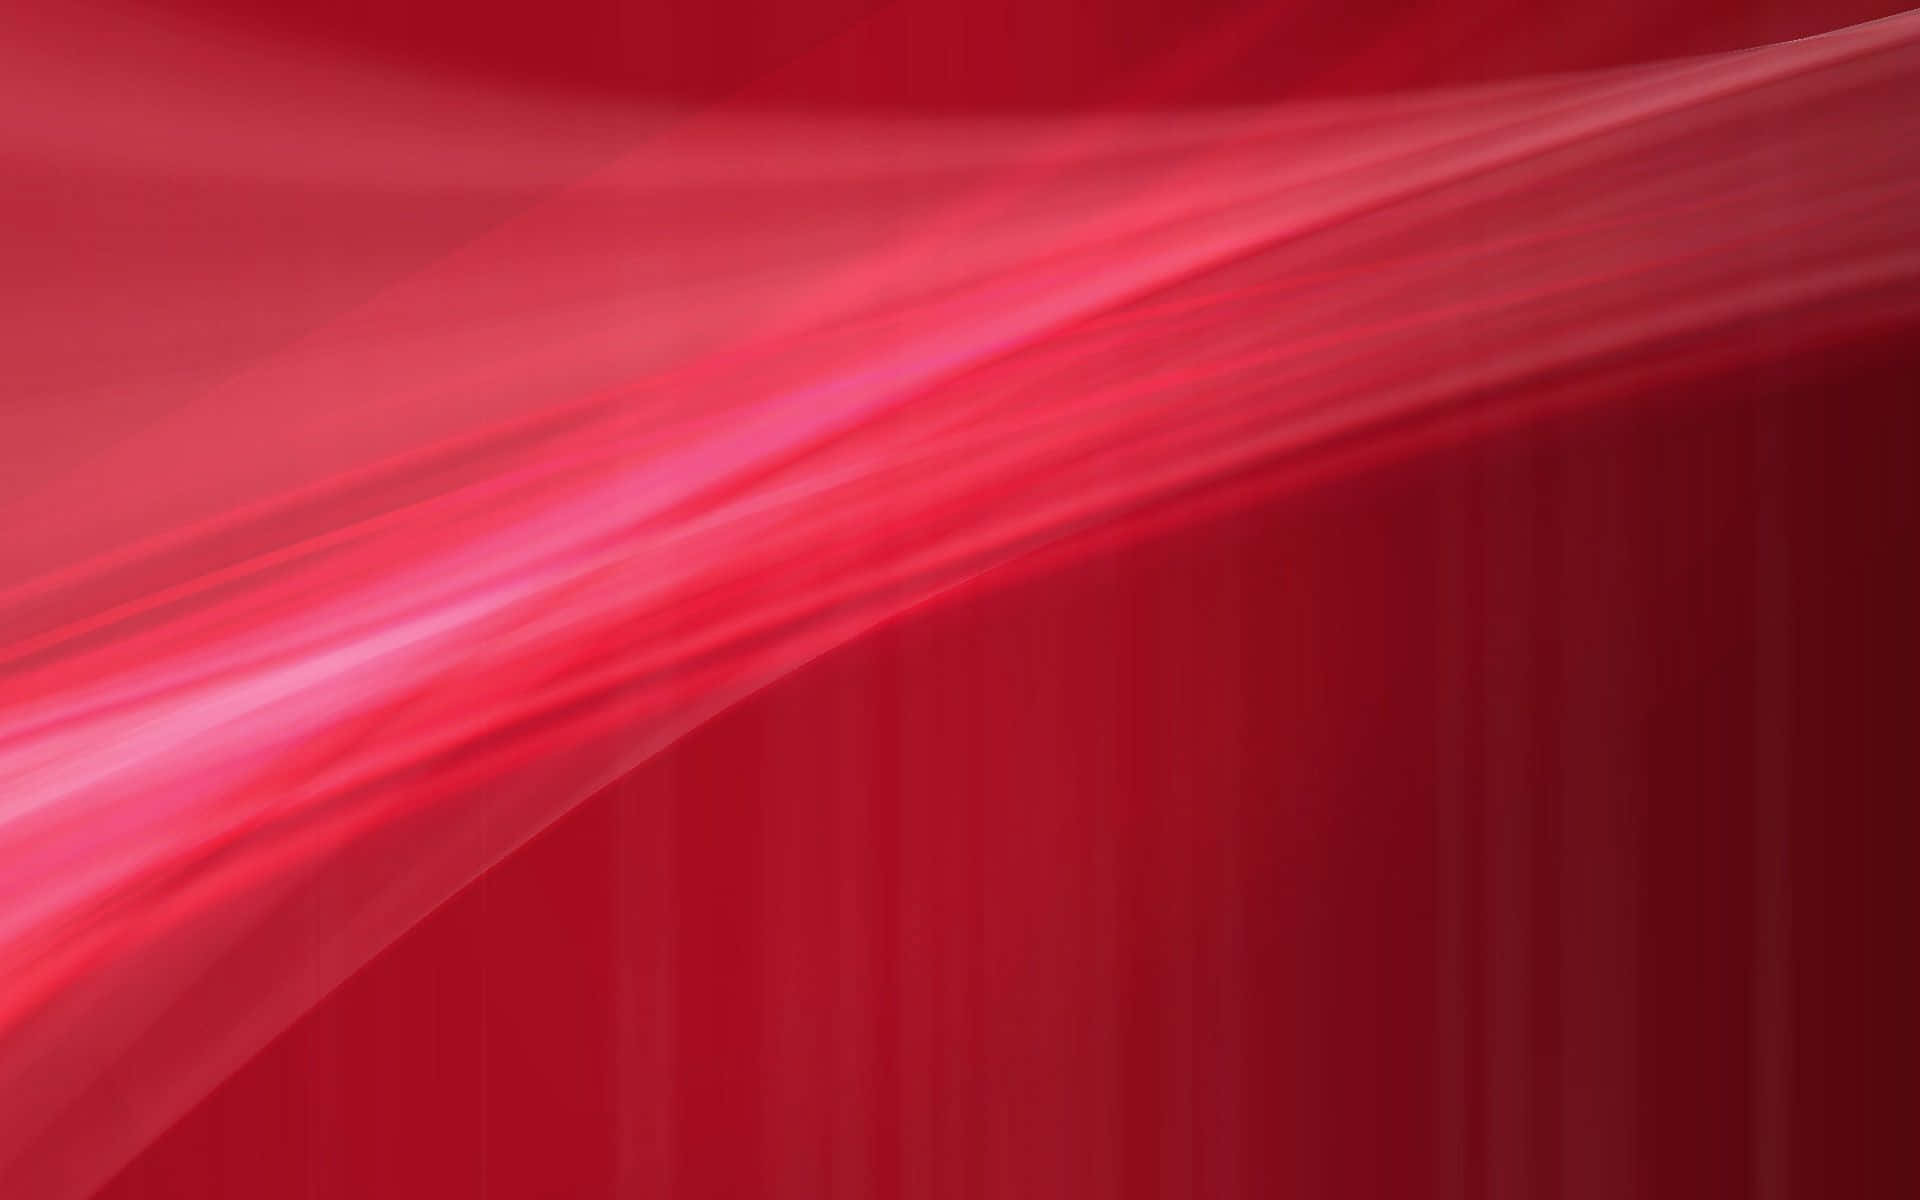 Red Abstract Background with contemporary Shapes